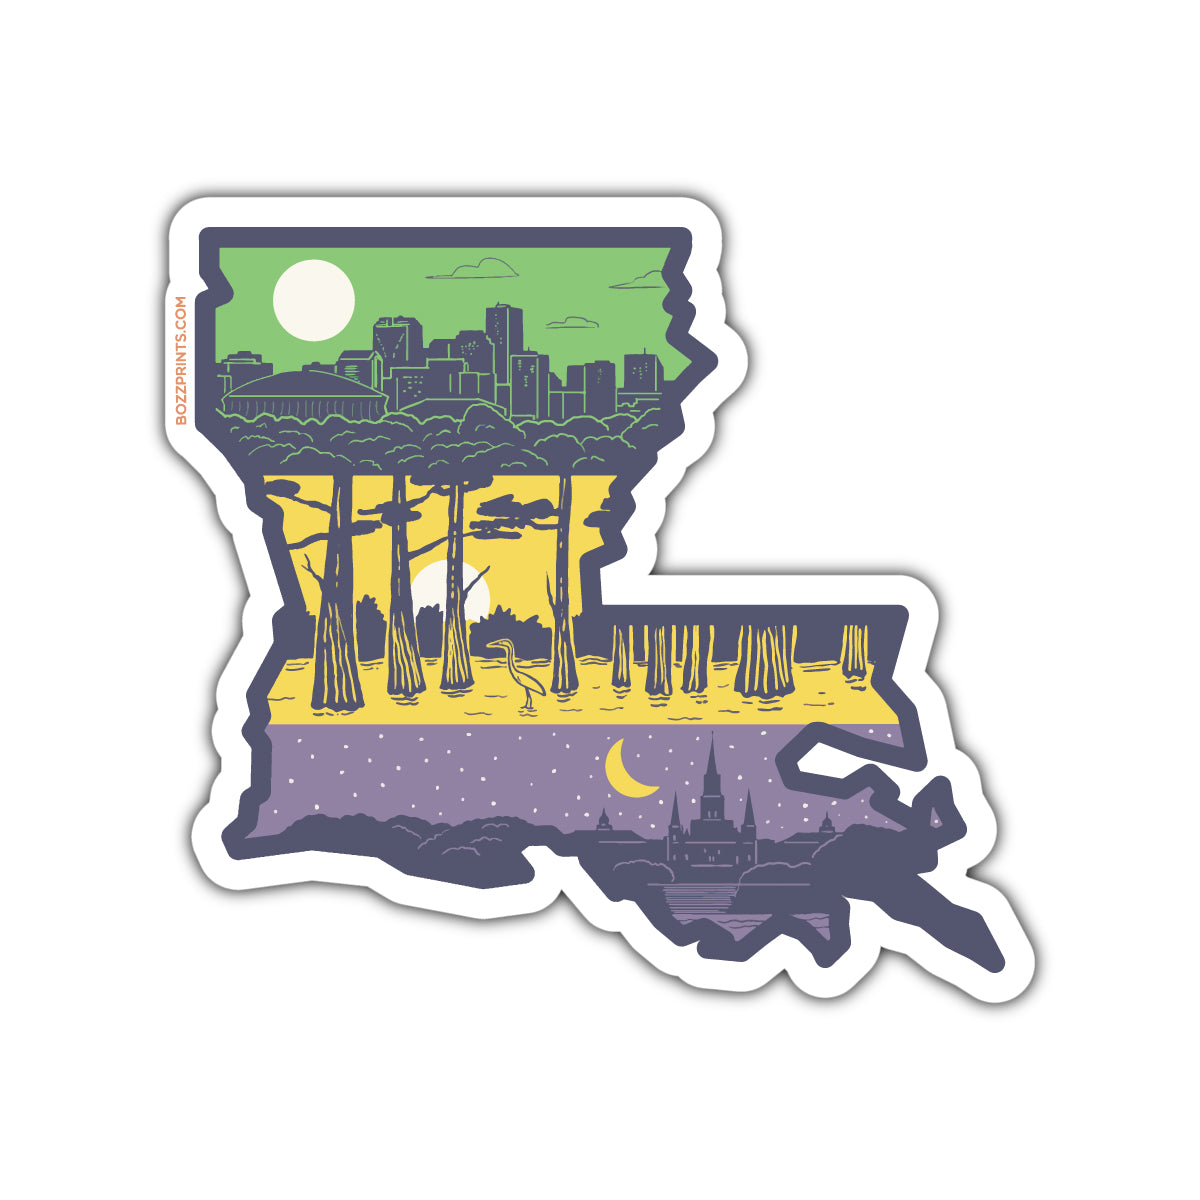 Flag of St. Louis, Missouri Sticker by Flags of the World